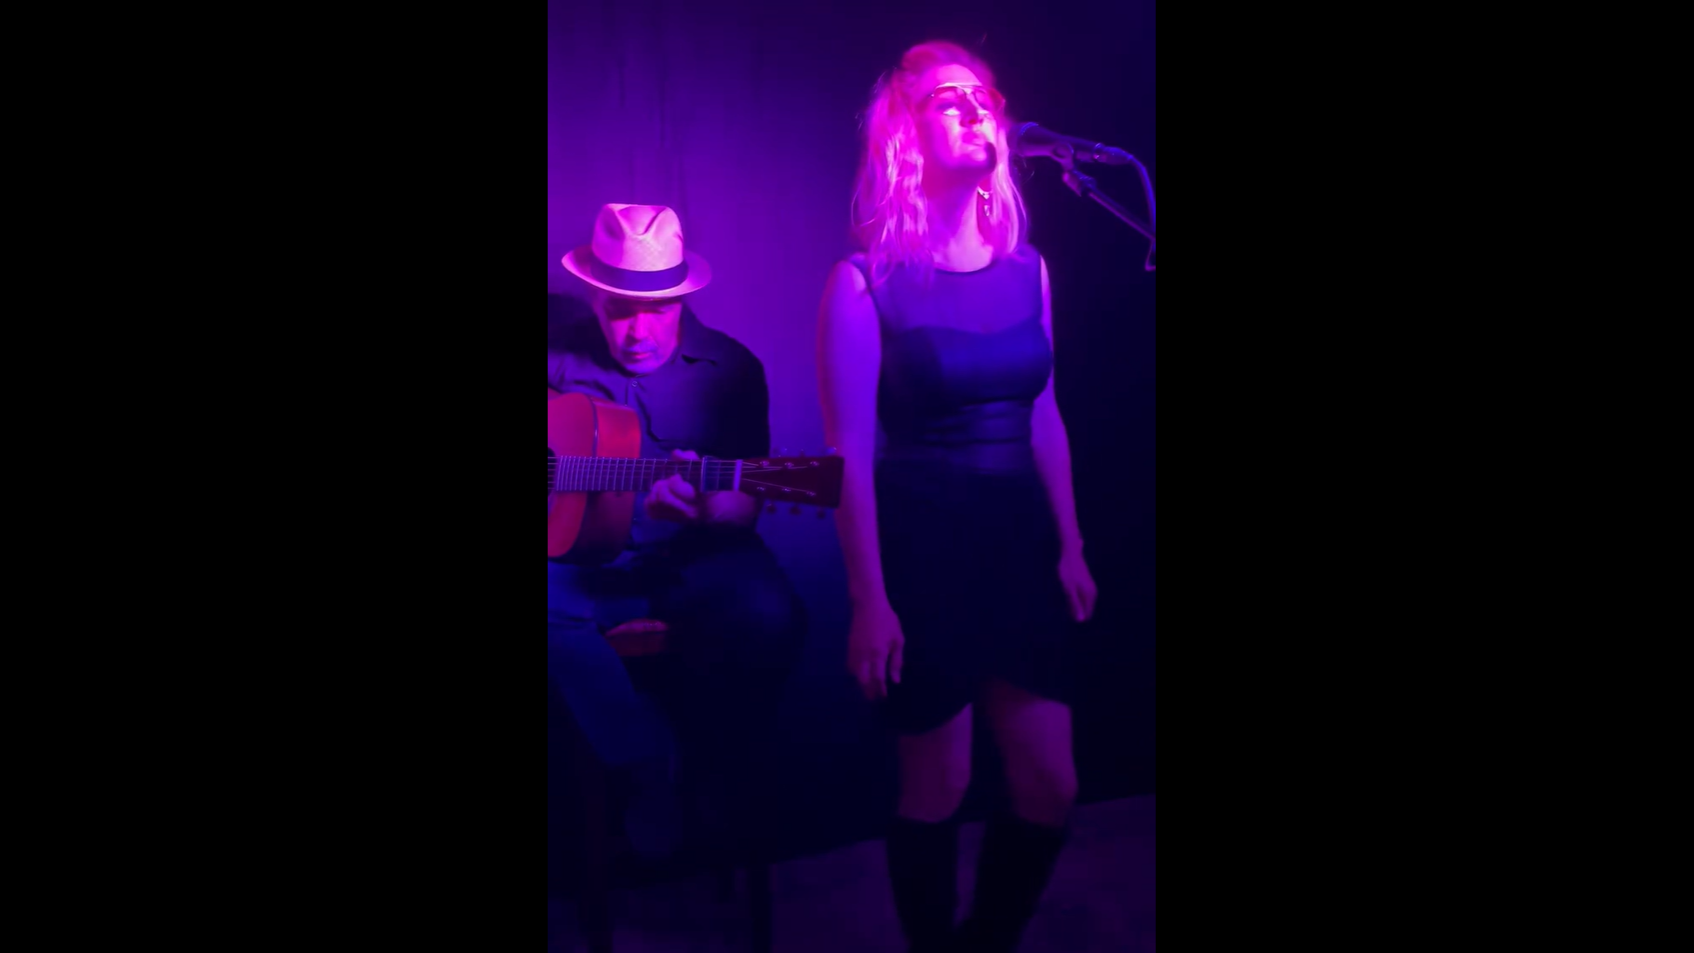 Load video: Americana duo playing a song about letting go of the past